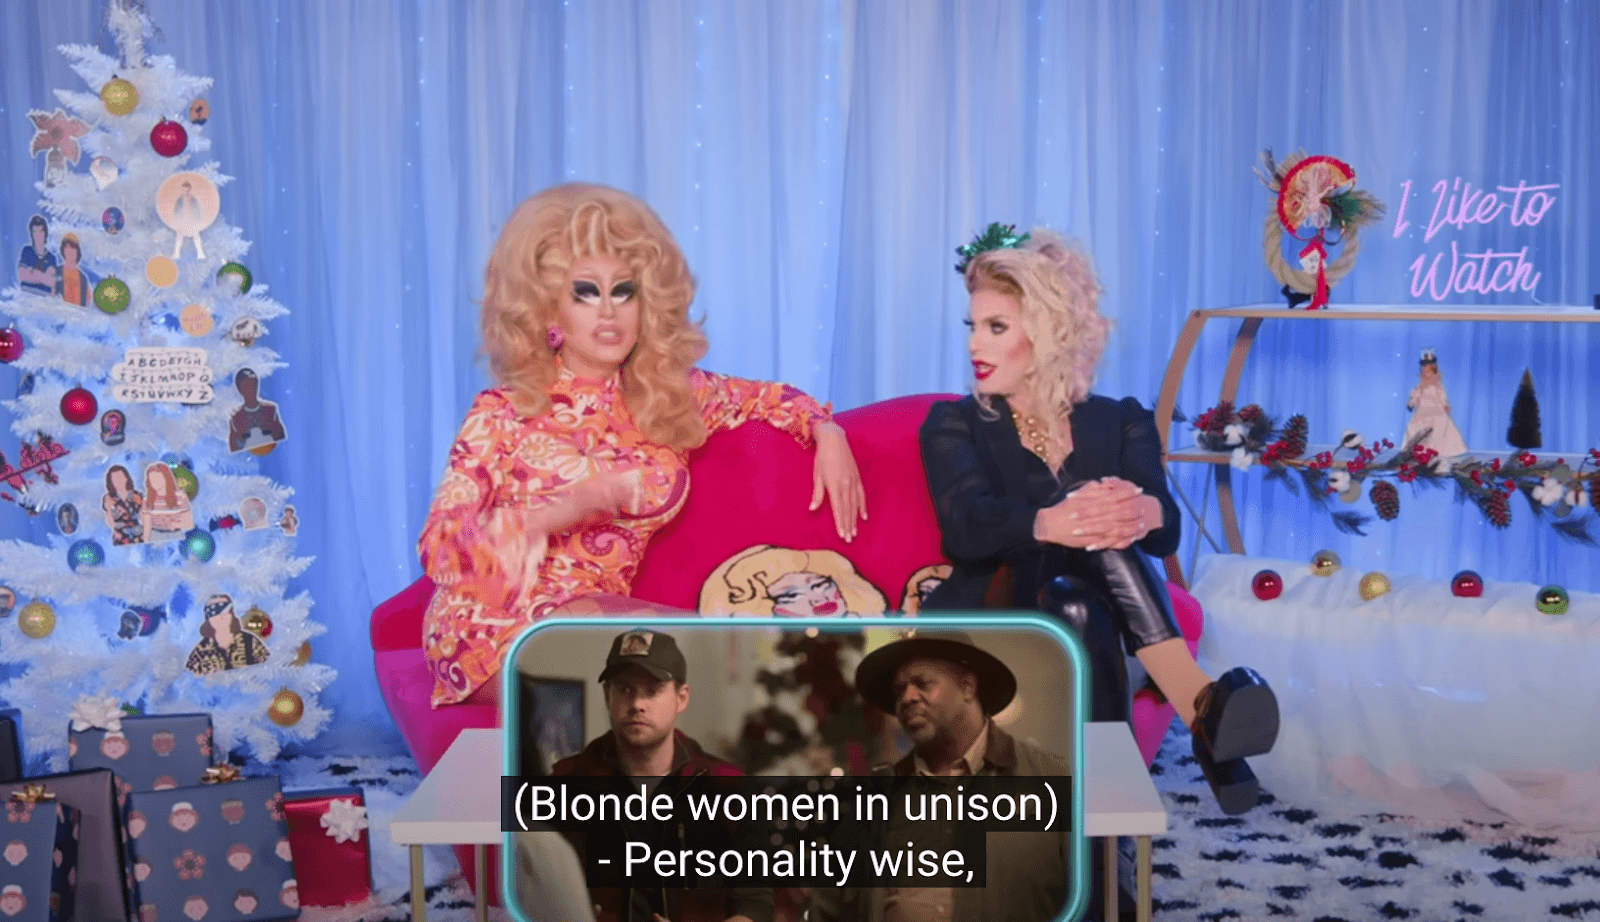 Screenshot from 'I like to watch" Youtube series showing drag queens Trixie and Katya saying "Personality wise..."